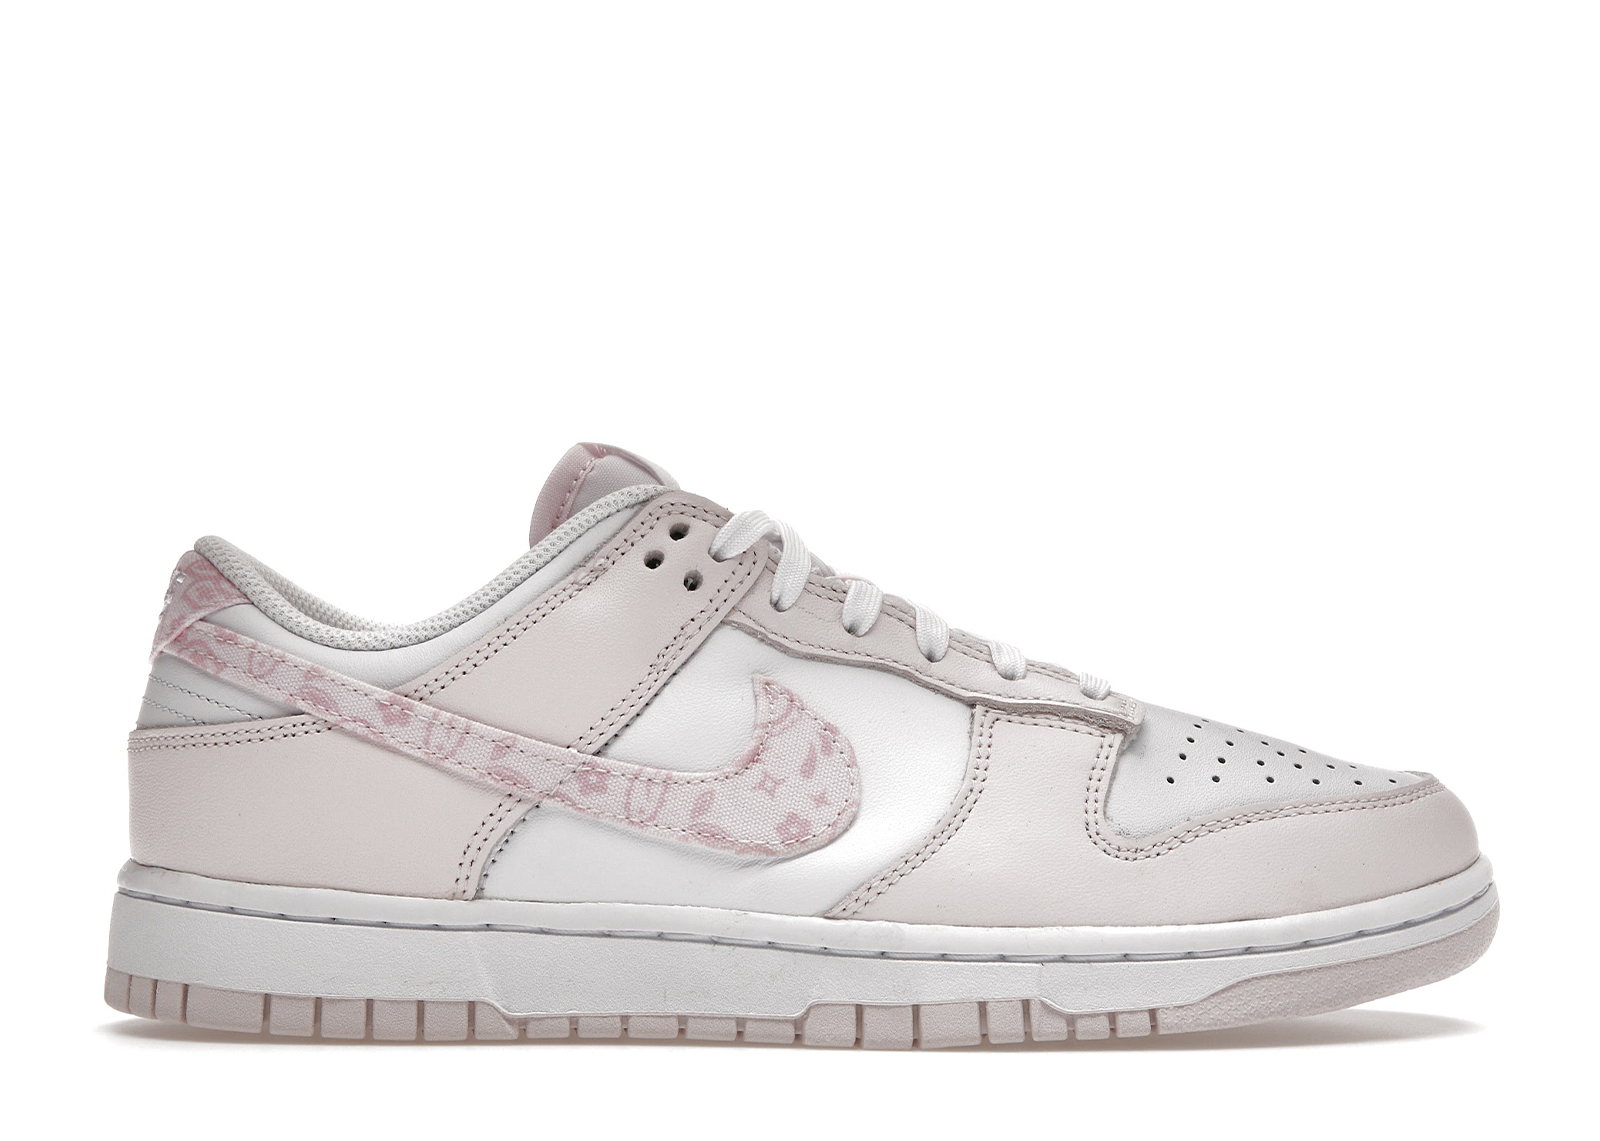 Nike Dunk Low Essential Paisley Pack Barley (Women's) - DH4401-104